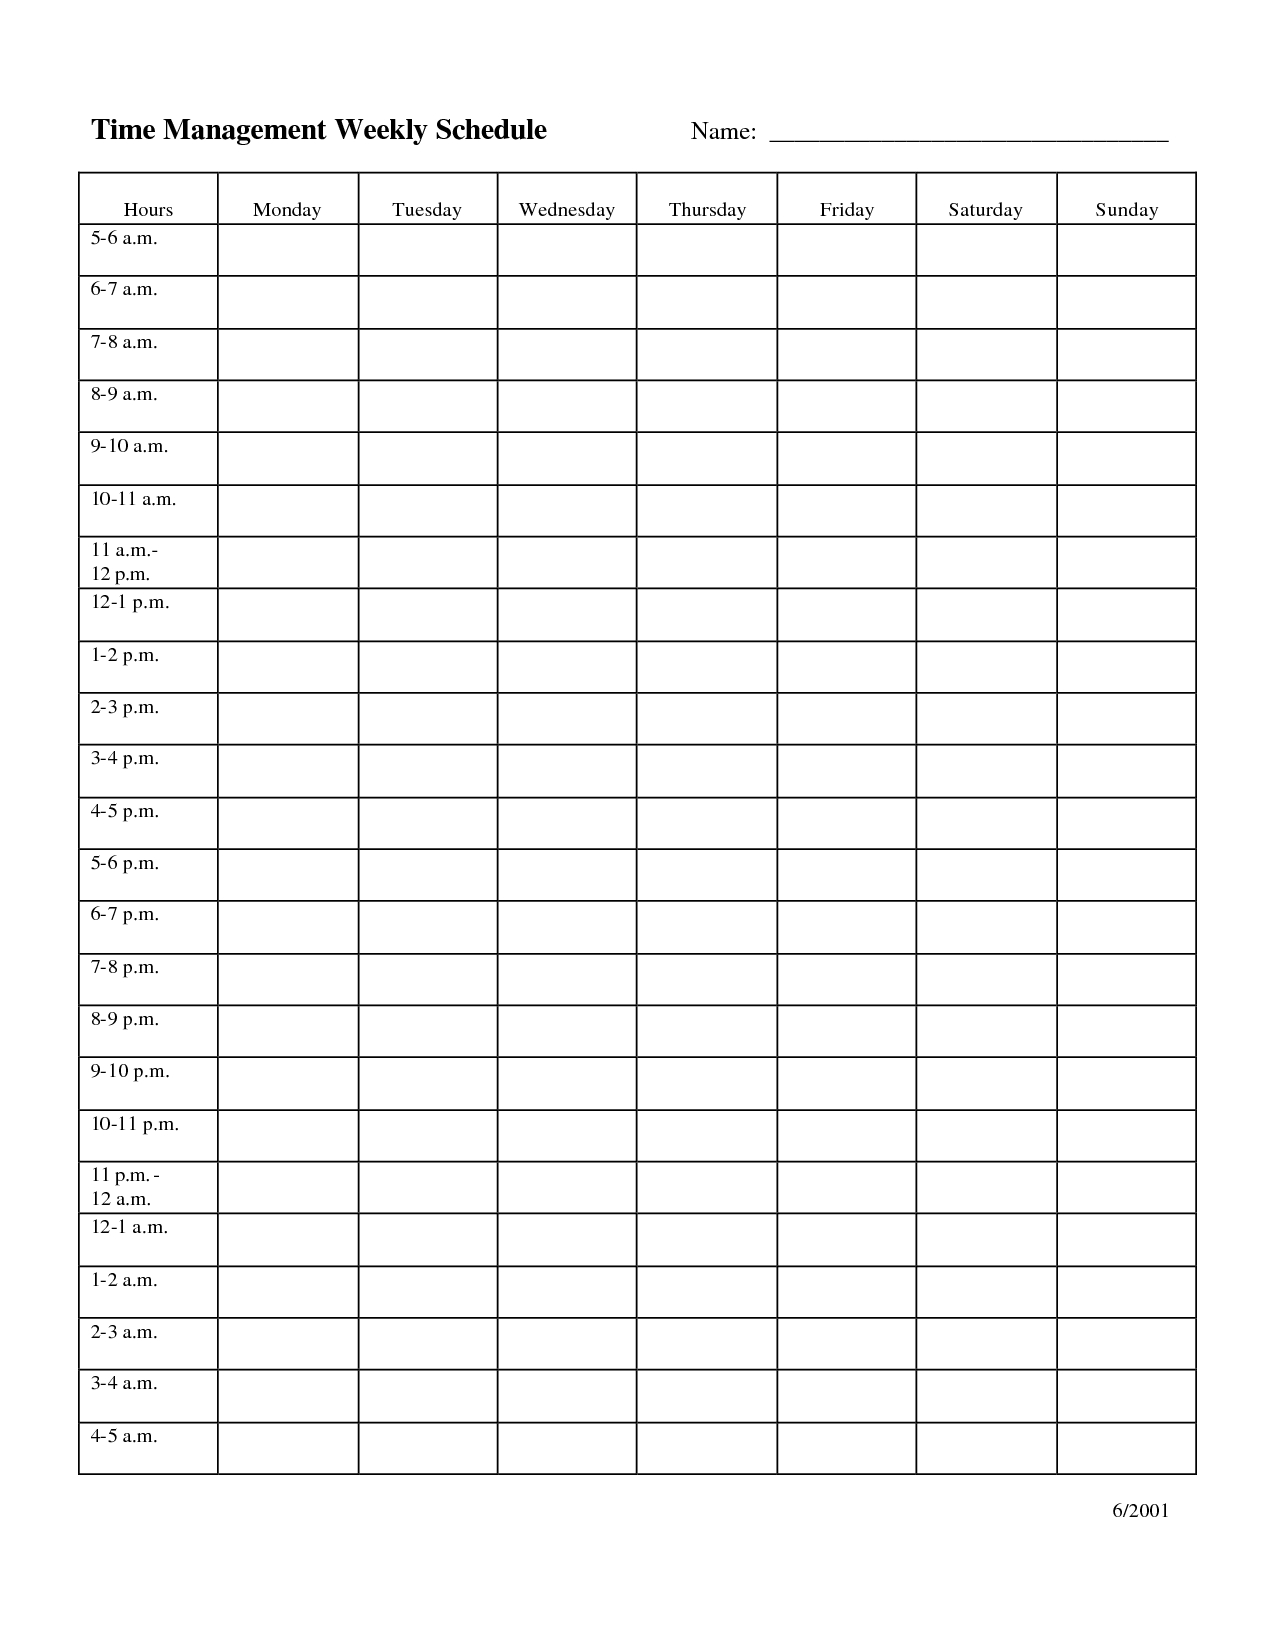 Time Management Weekly Schedule Template | Weekly Planner